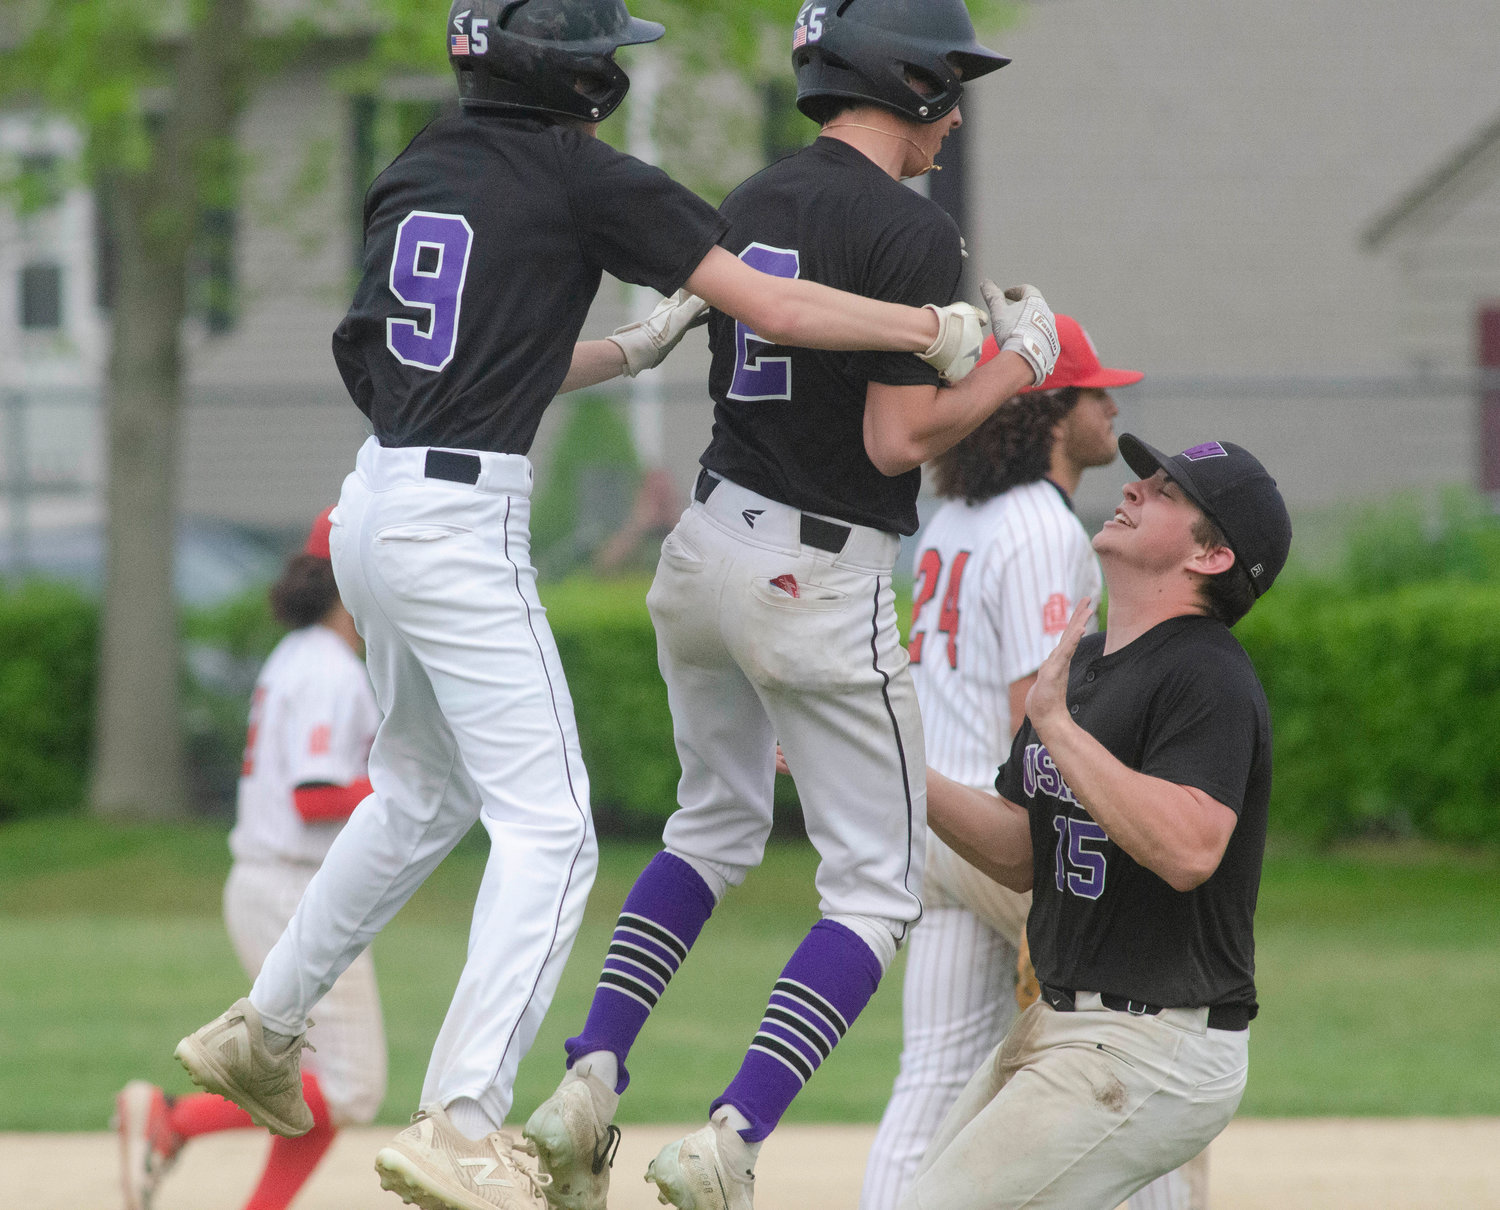 Ethan Santerre (left) and Jack Standish are the first to celebrate with Aidan Ramaglia (middle) after his game winning hit.